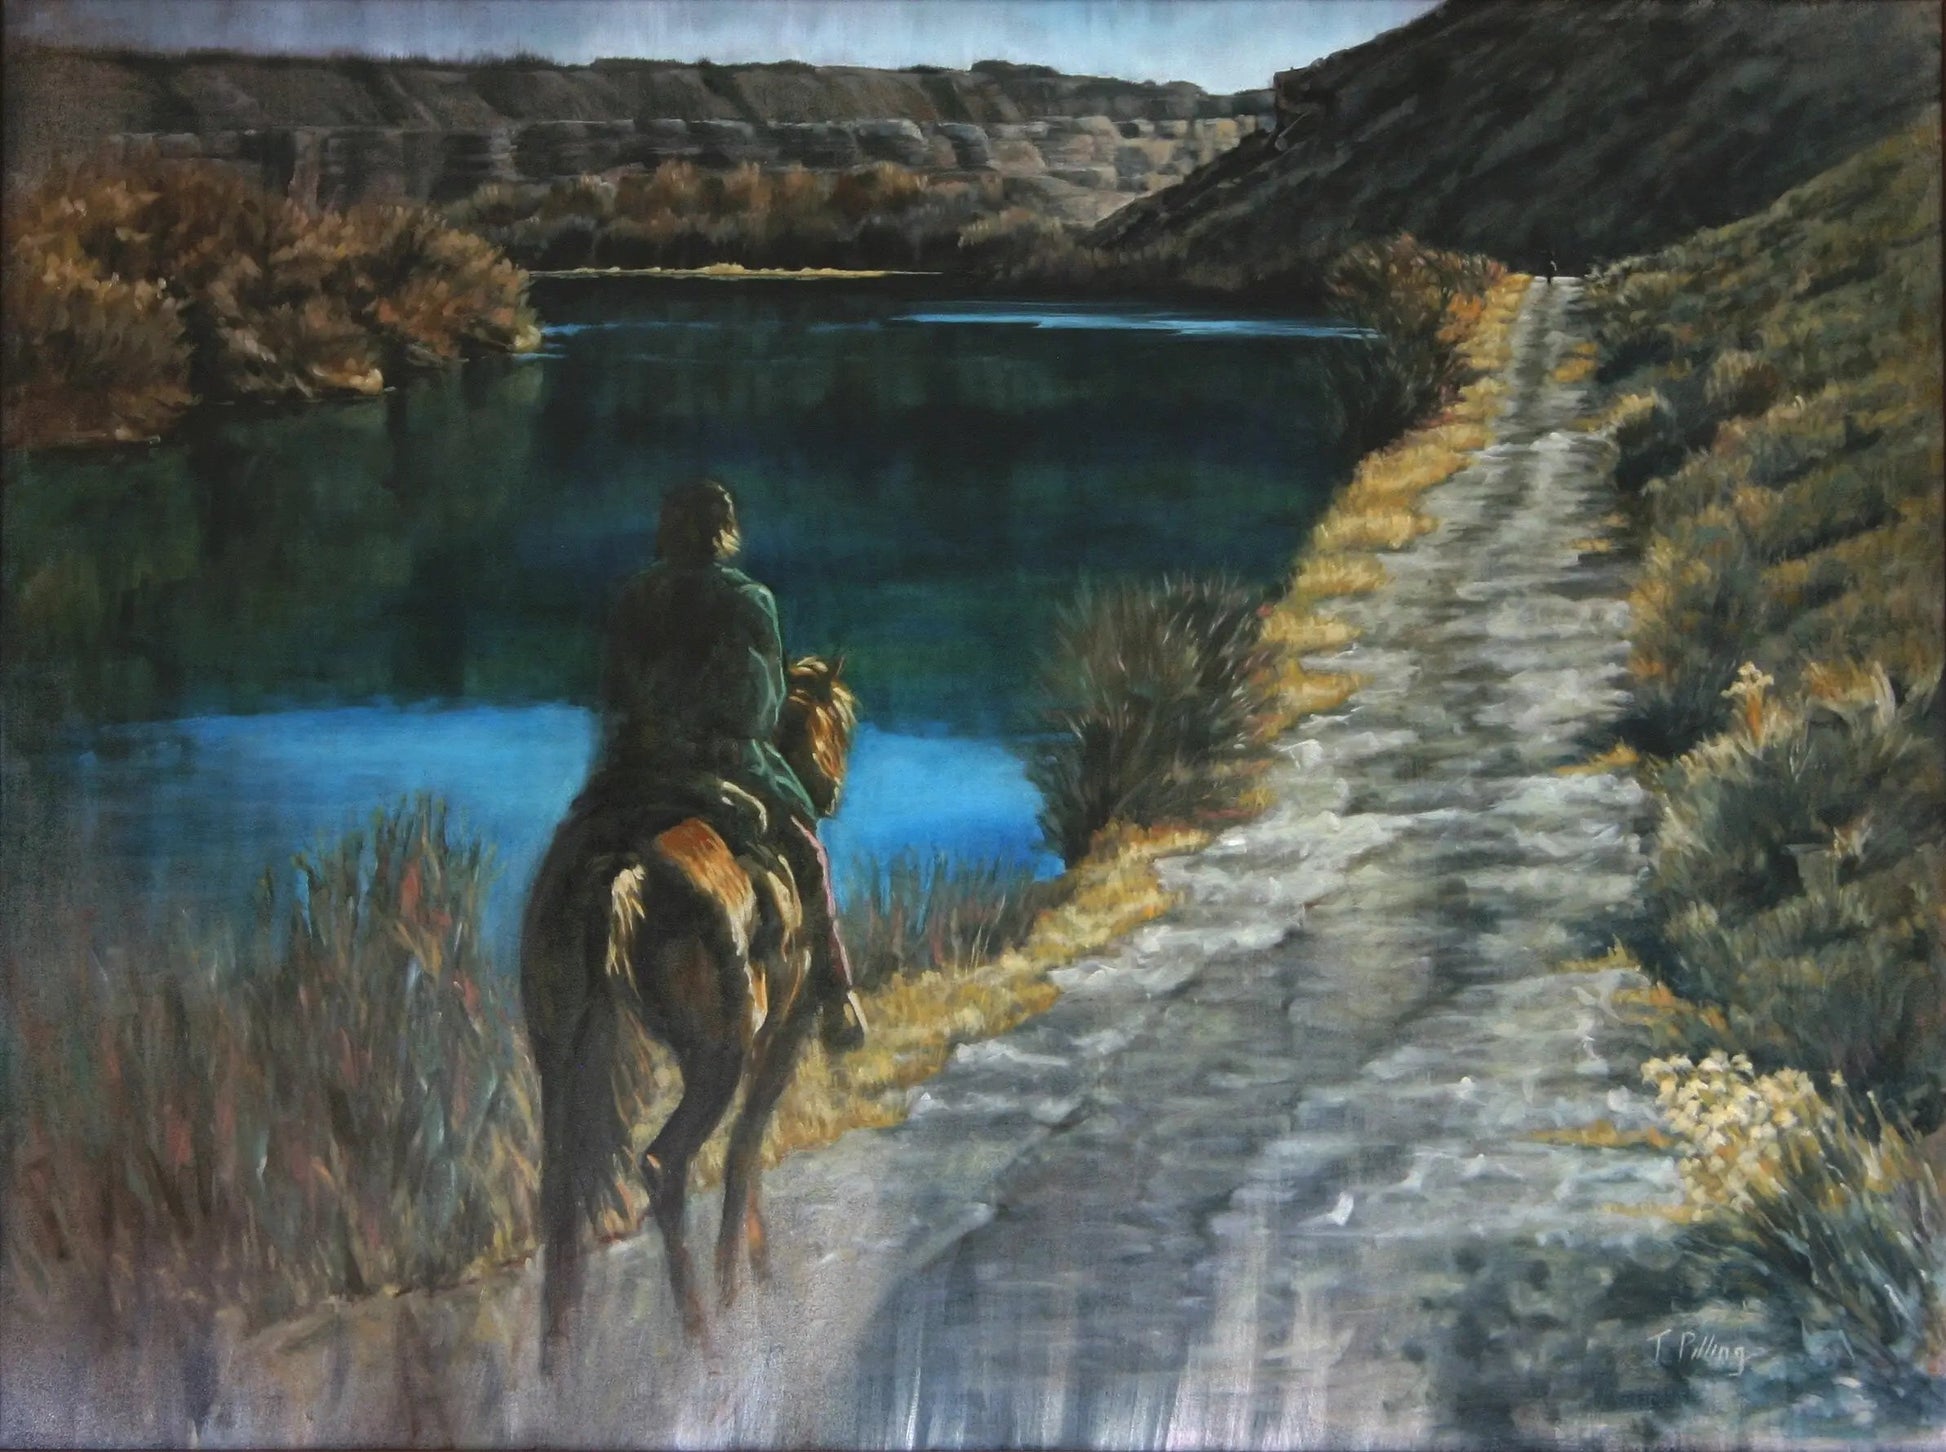 Landscape oil painting of horseback riders by Delores River in the late afternoon sun. Painted by artist Tanya Pilling.